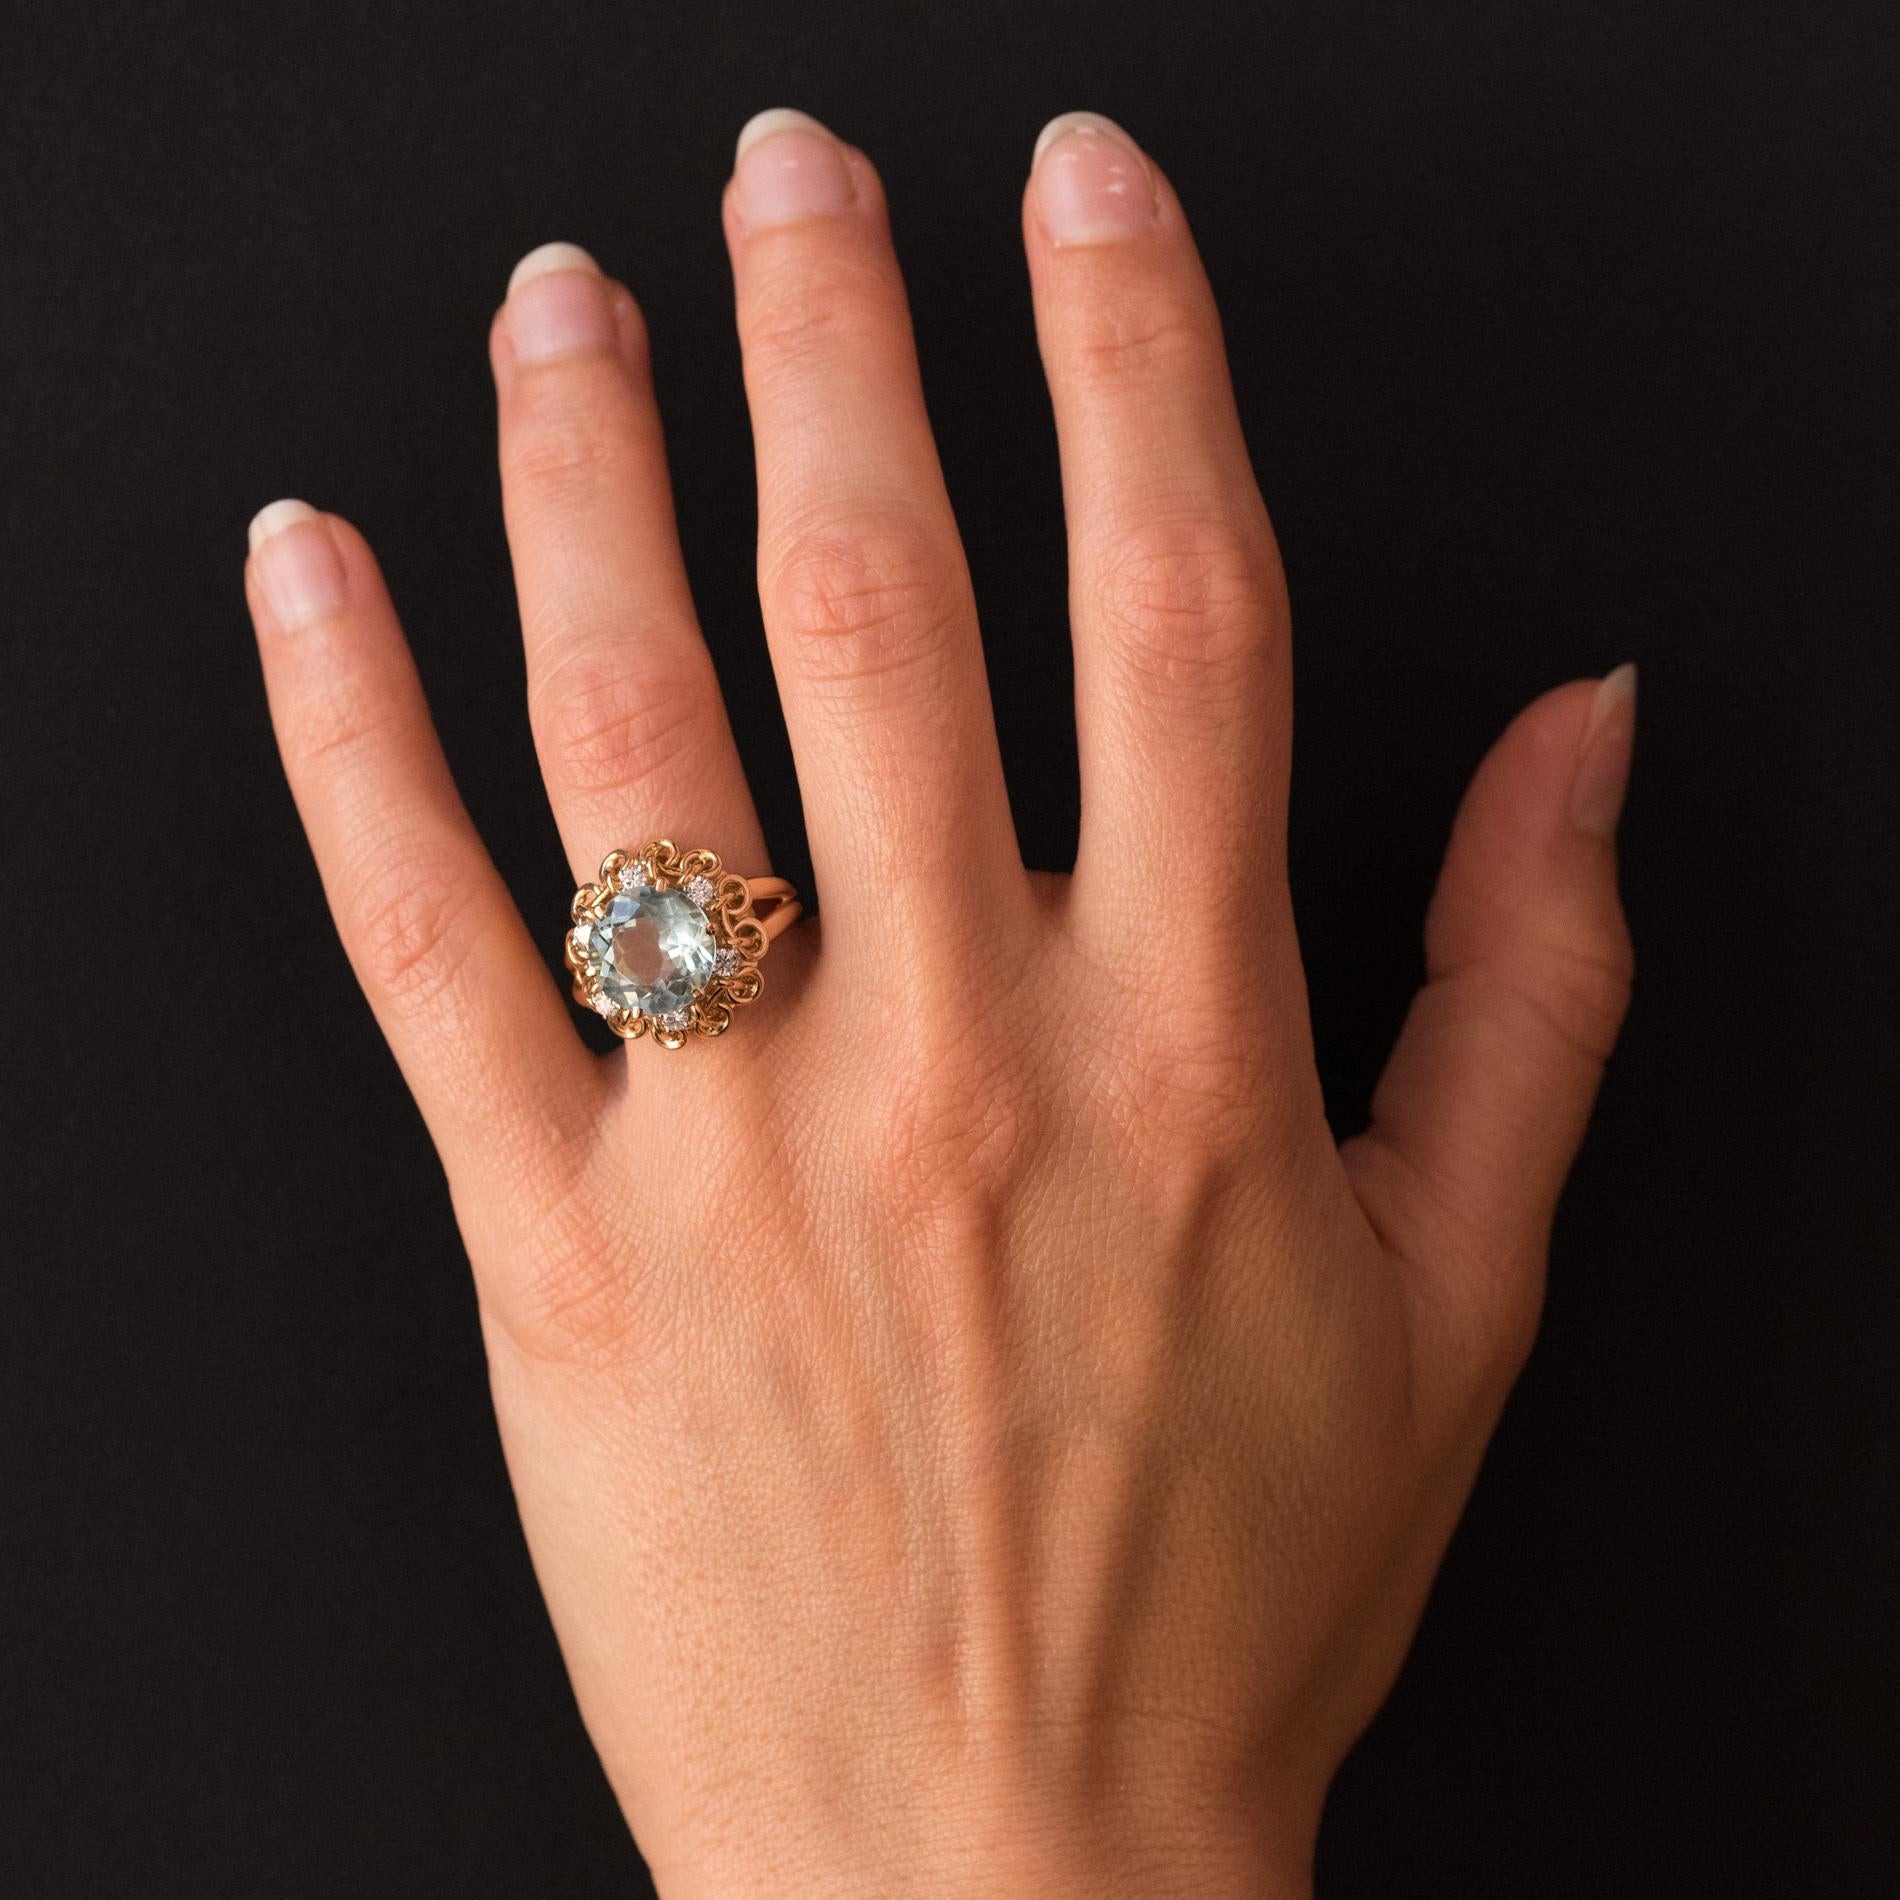 Ring in 18 karats rose gold, and platinum, dog's head hallmark.
A retro jewel, this ring is set with claws on top of a round aquamarine surrounded by 6 modern brilliant cut diamonds. The mounting is made of gold threads wrapped between them. The